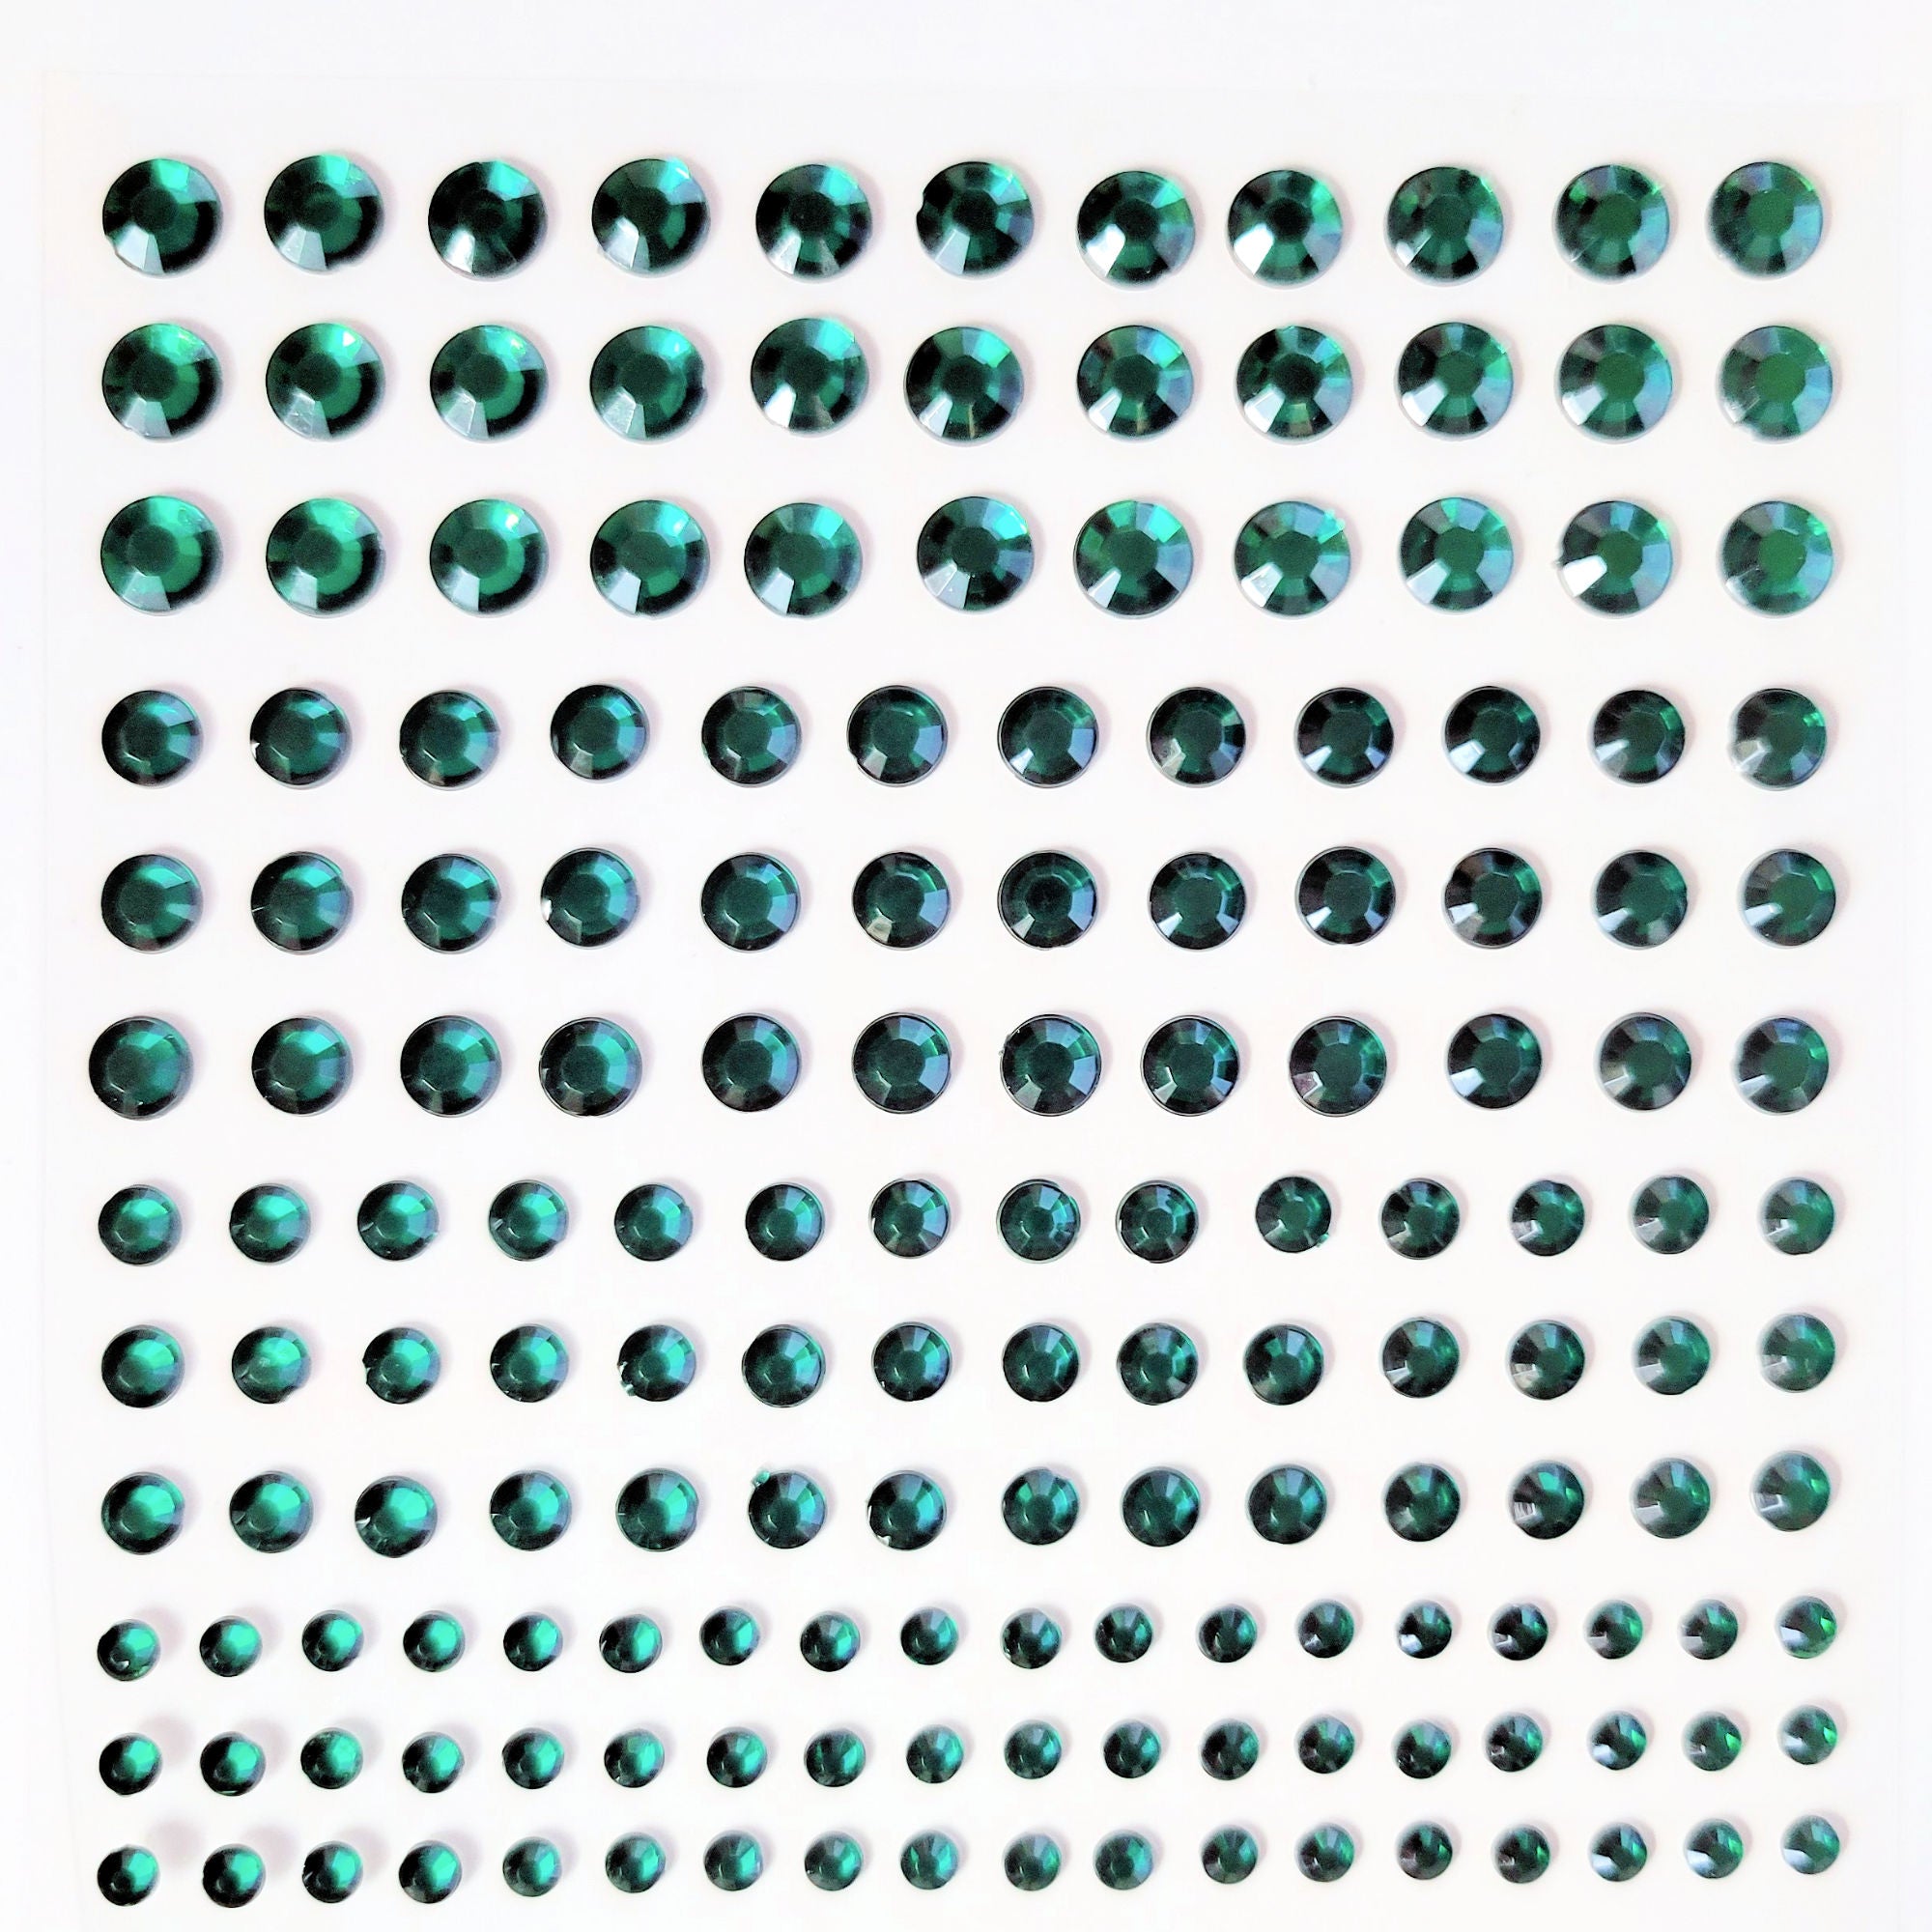 Basically Bling Collection Green 2, 3, 4, 5 mm Self-Adhesive Rhinestones by SSC Designs - Pkg. of 165